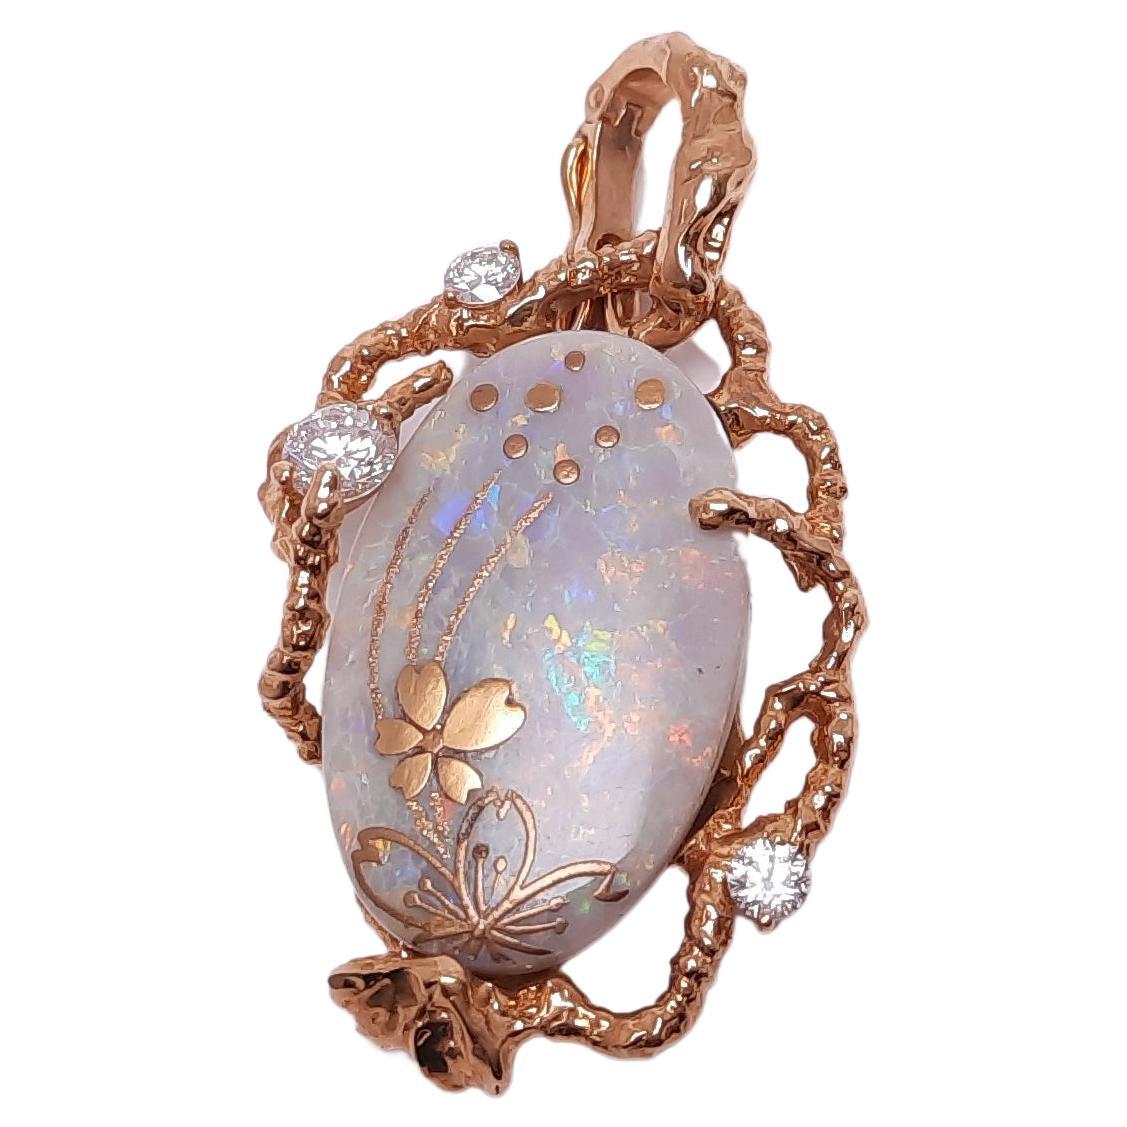 18k Gold Art Opal Pendant with Japanese Gold Painting Technology